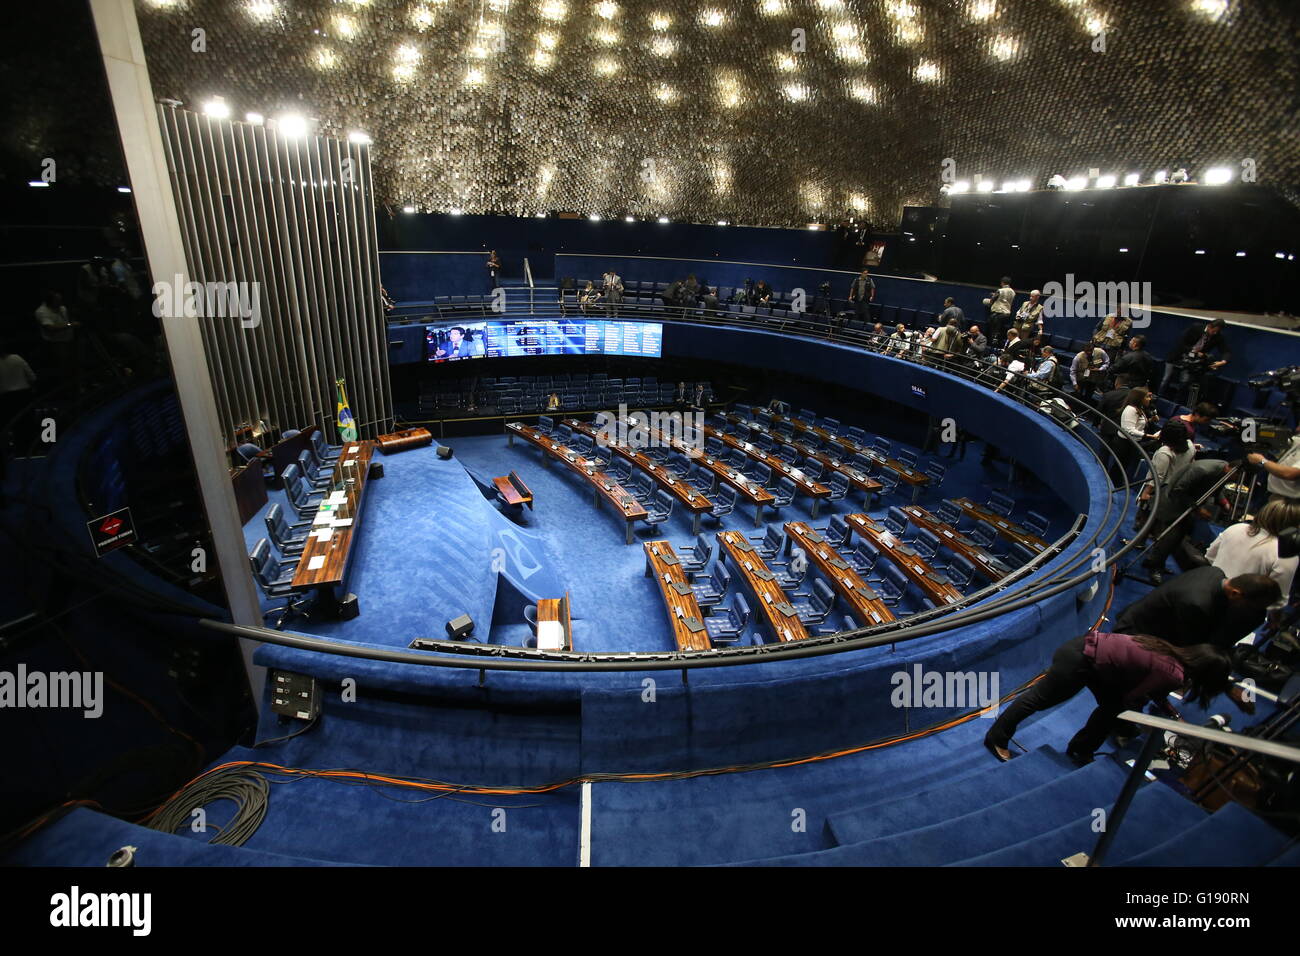 (160511) -- BRASILIA, May 11, 2016 (Xinhua) -- The Chamber of Senators plenary session is held in Brasilia, capital of Brazil, on May 11, 2016. The Brazilian Senate on Wednesday started the plenary session debating the voting for the impeachment of President Dilma Rousseff in Brasilia. (Xinhua/Andre Dusek/AGENCIA ESTADO) (jg) ***BRAZIL OUT*** Stock Photo